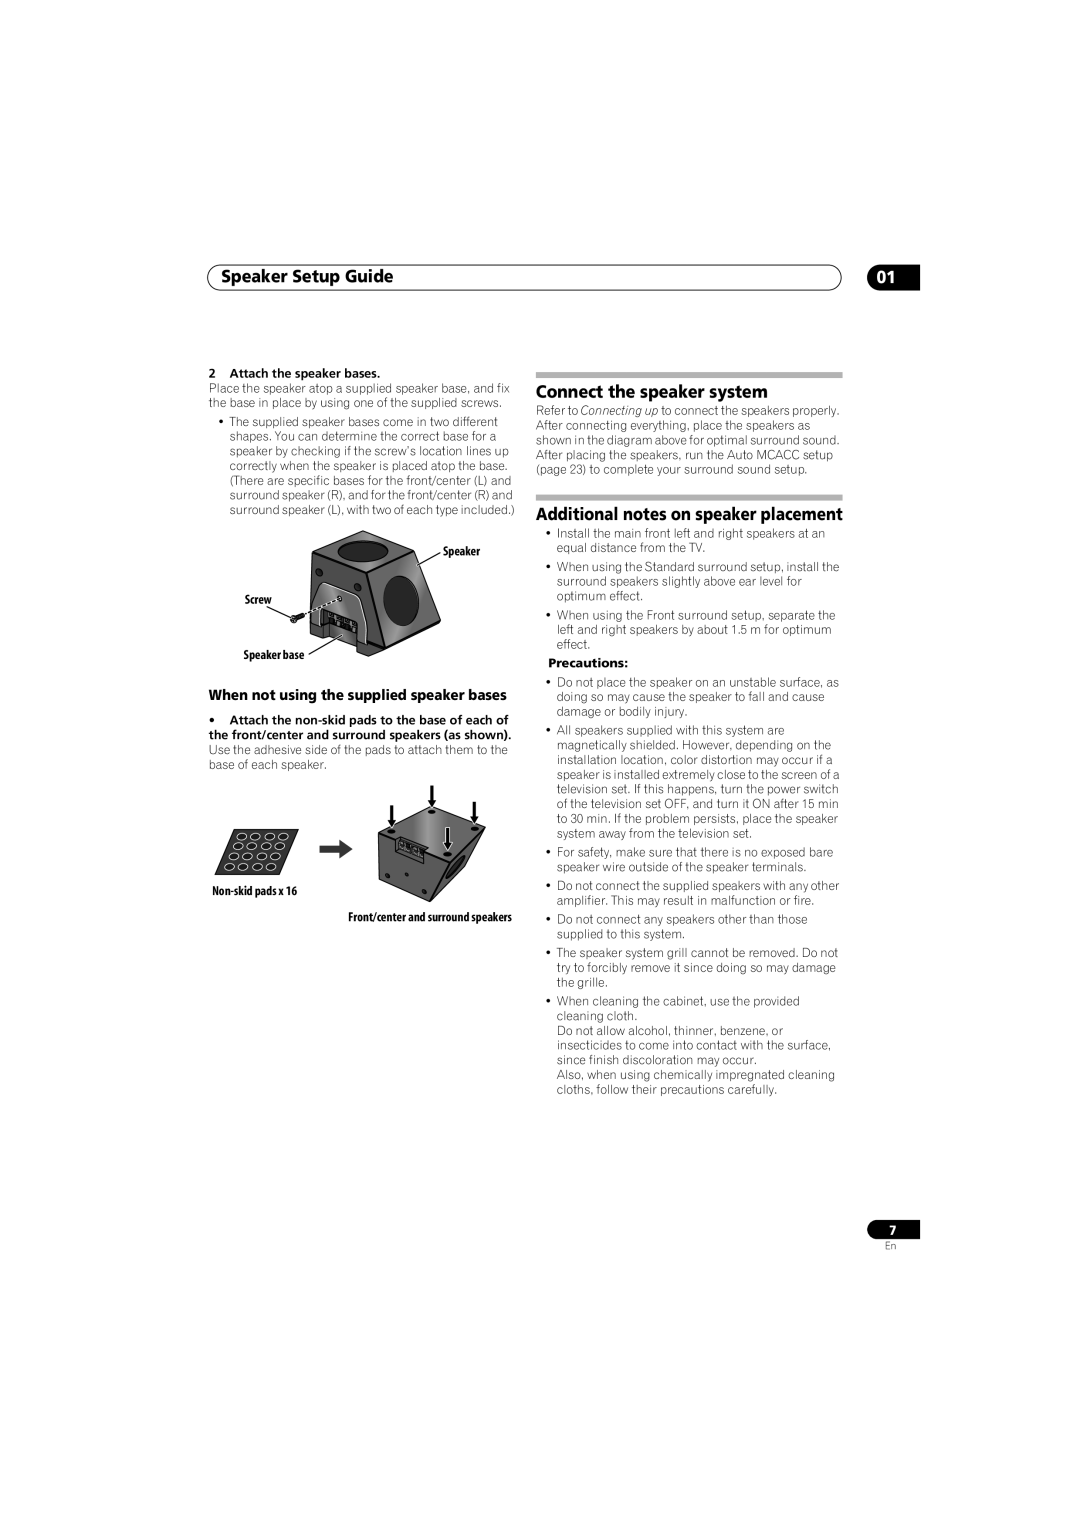 Pioneer HTP-LX70 Speaker Setup Guide, Connect the speaker system, Additional notes on speaker placement, Non-skidpads x 